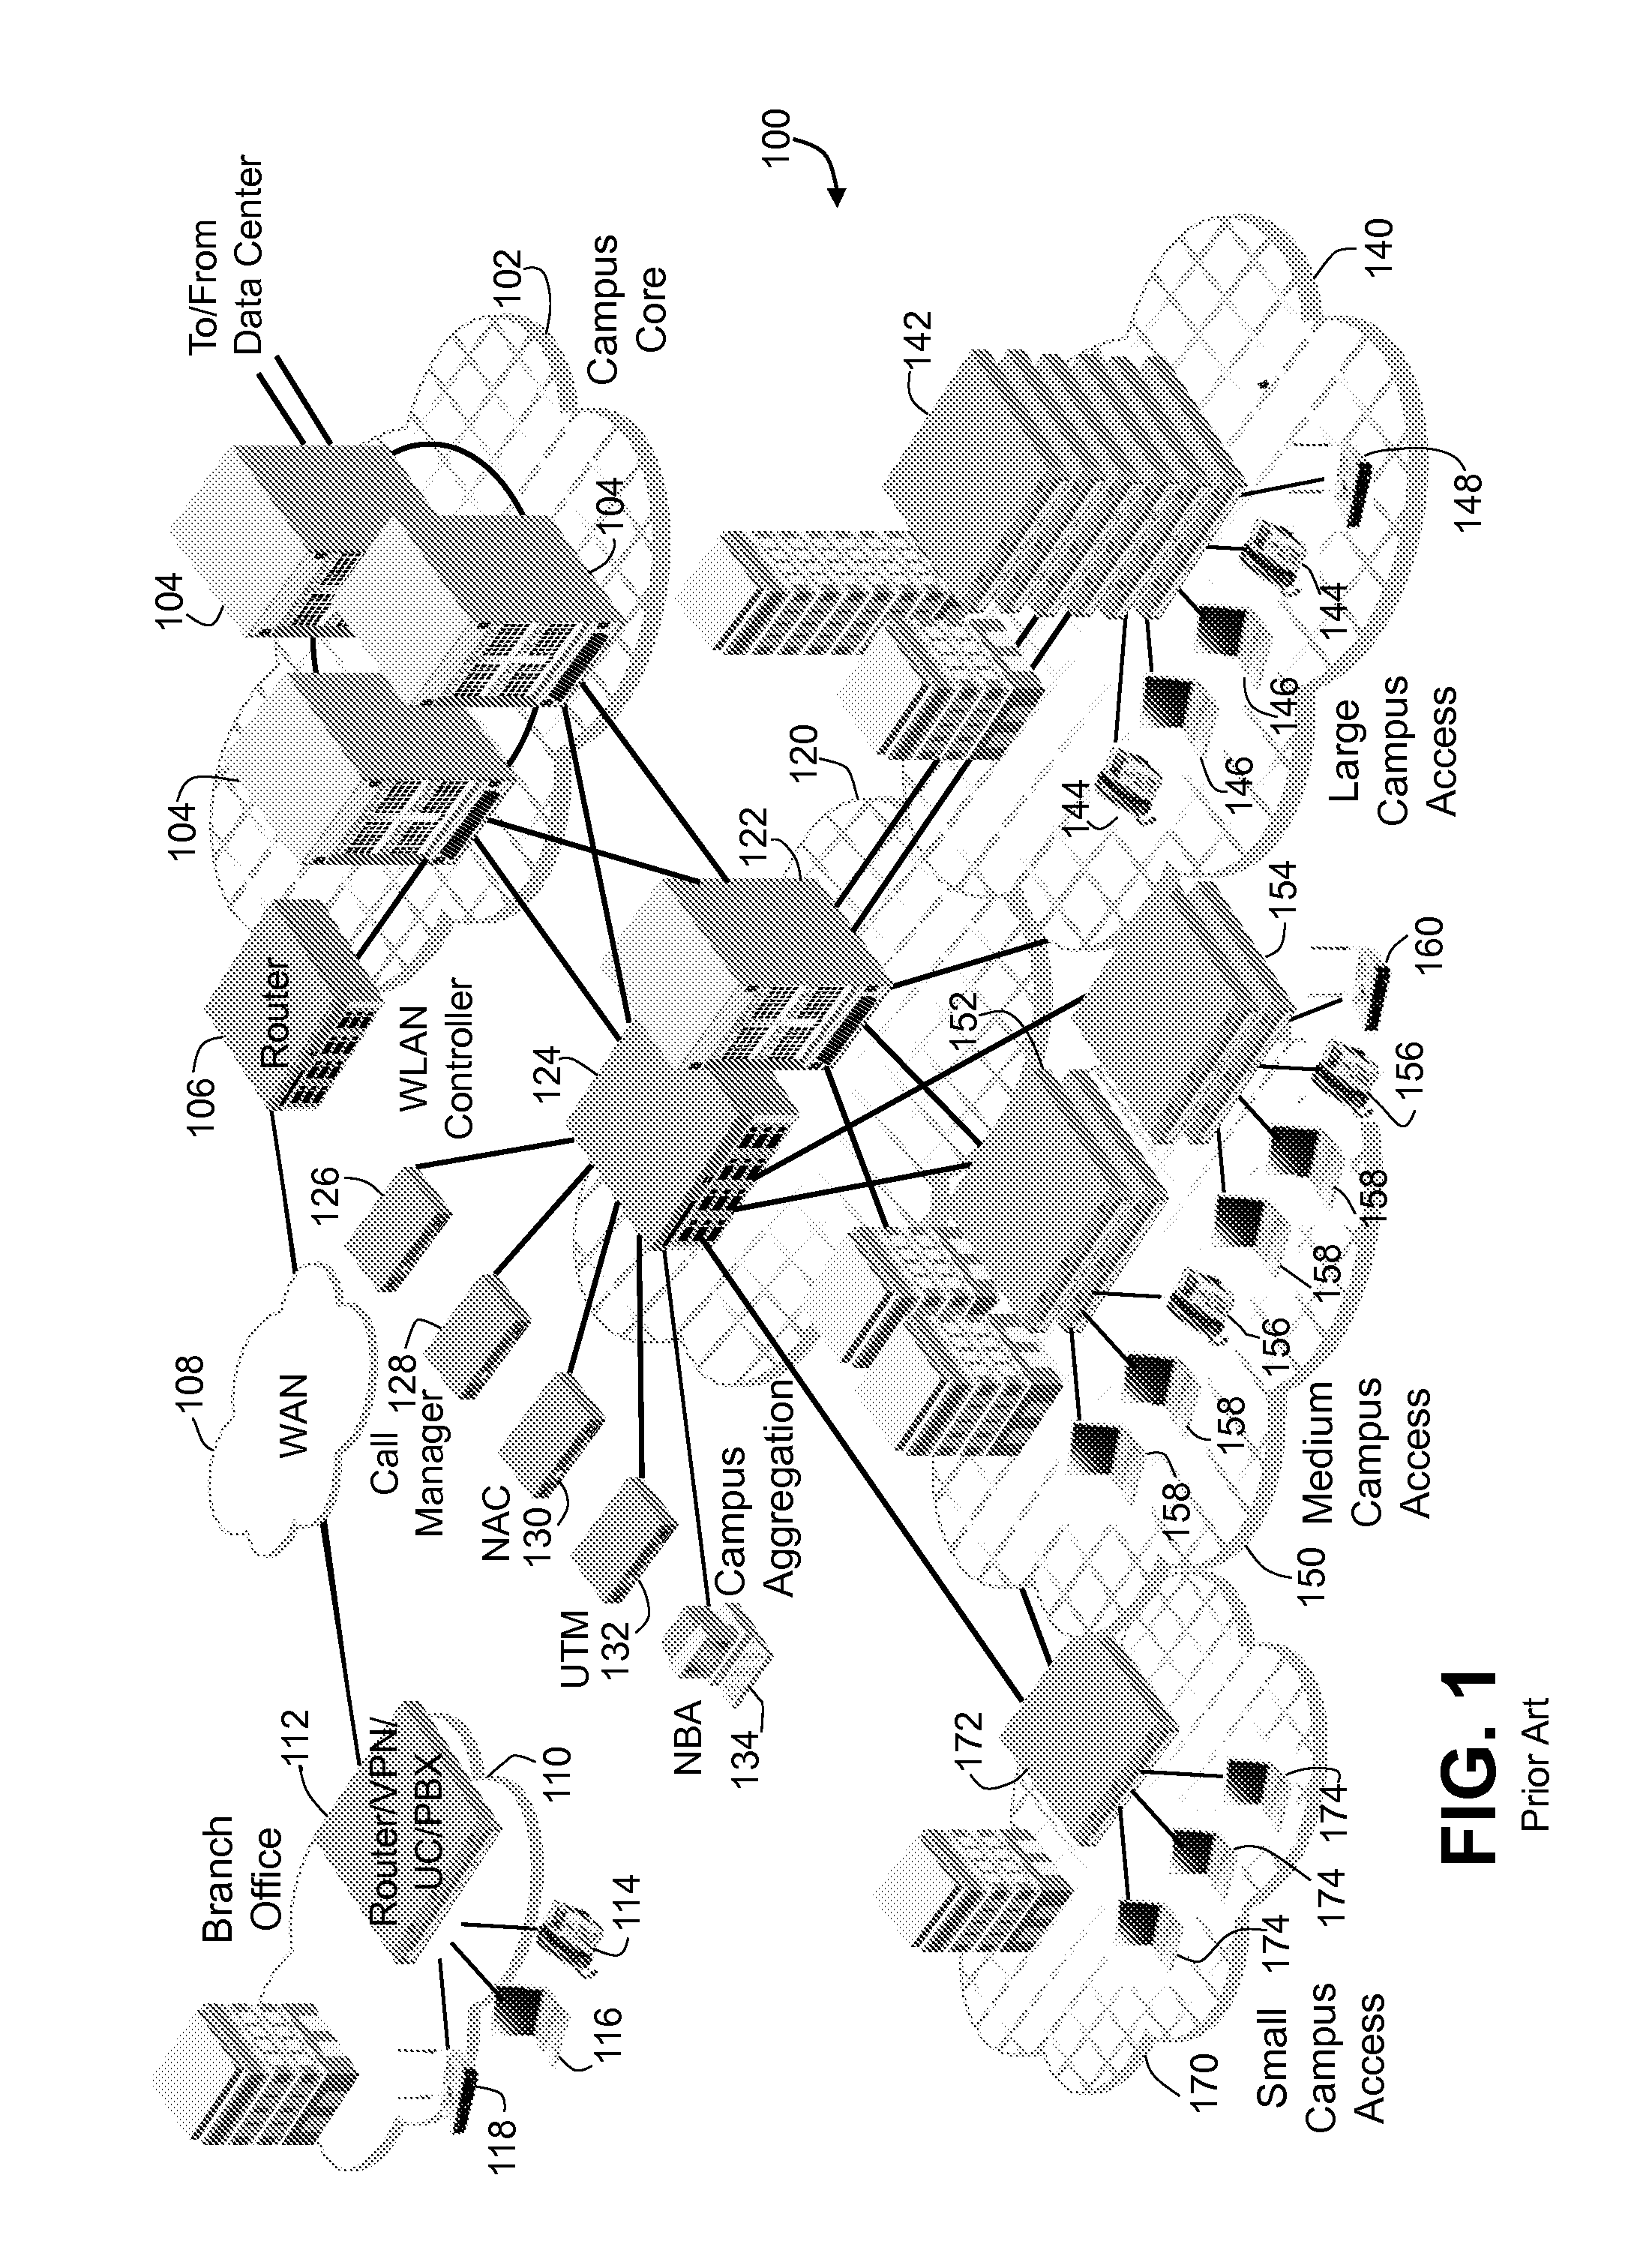 Network architecture with distribution of packet services to various switches